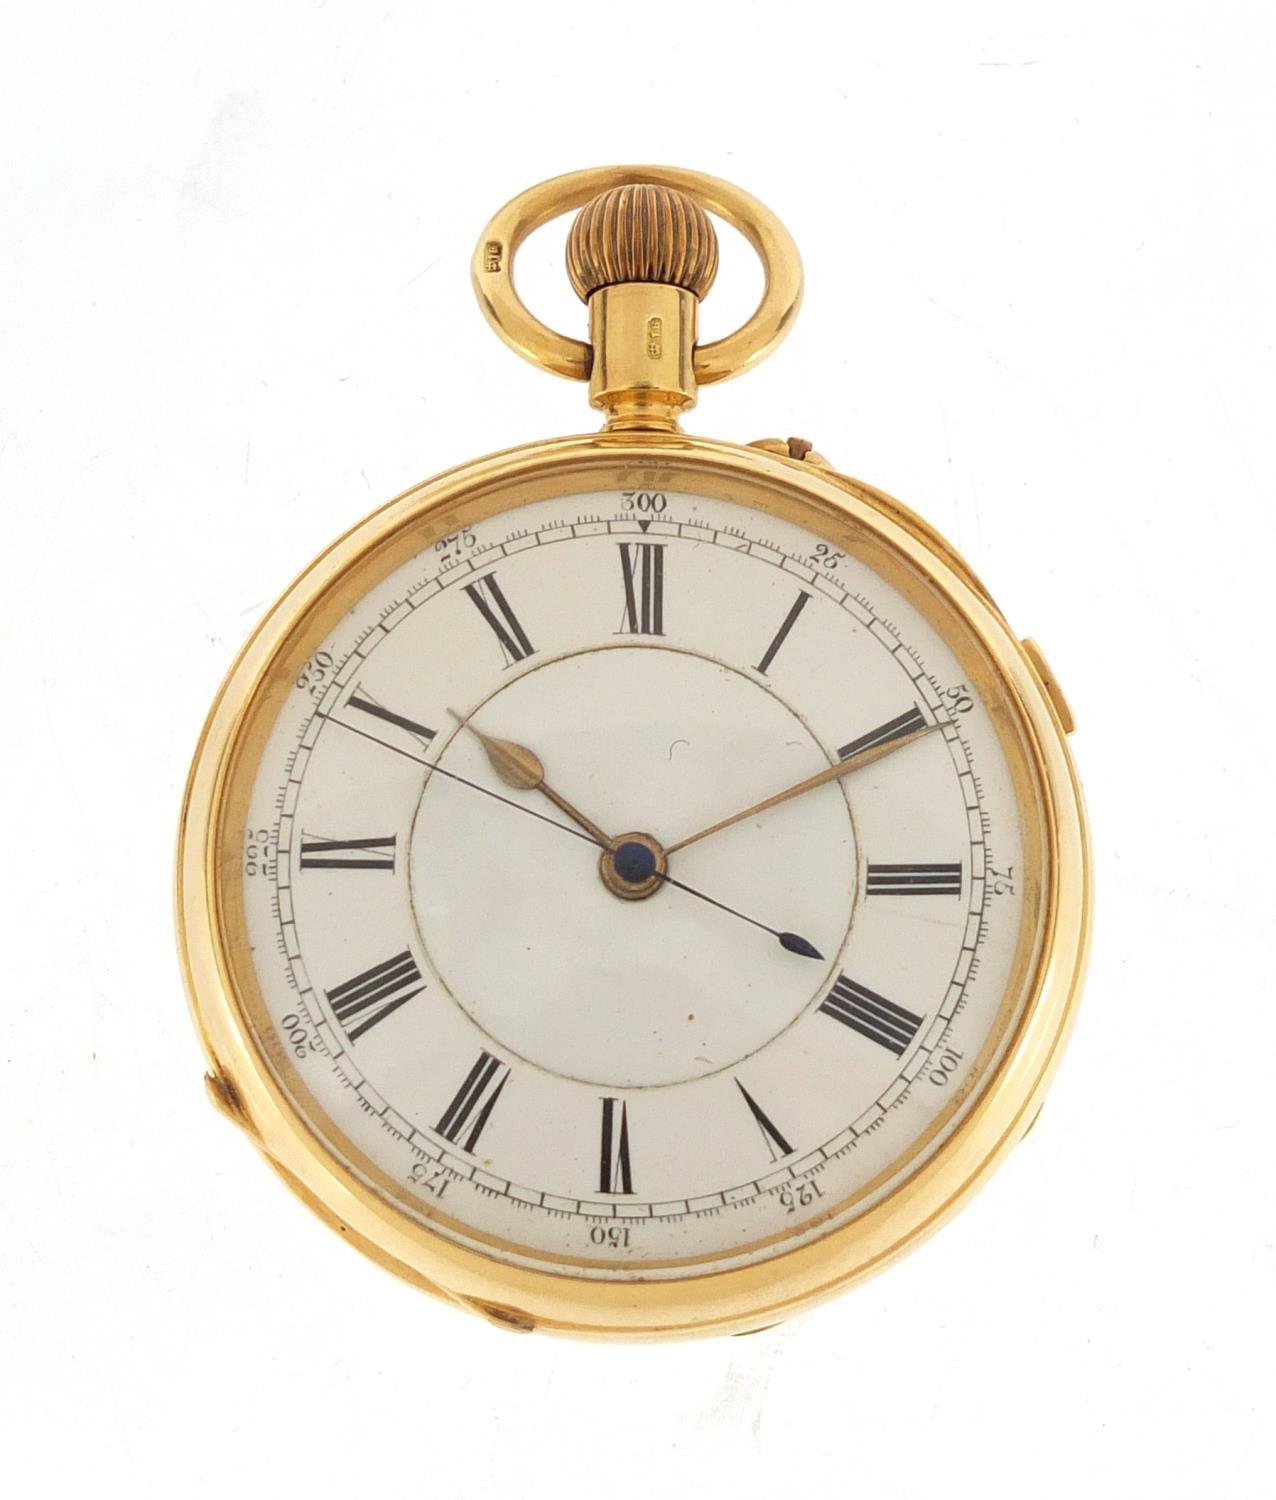 Gentlemen's 18ct gold open face chronograph pocket watch, the movement numbered 241799, 50.5mm in